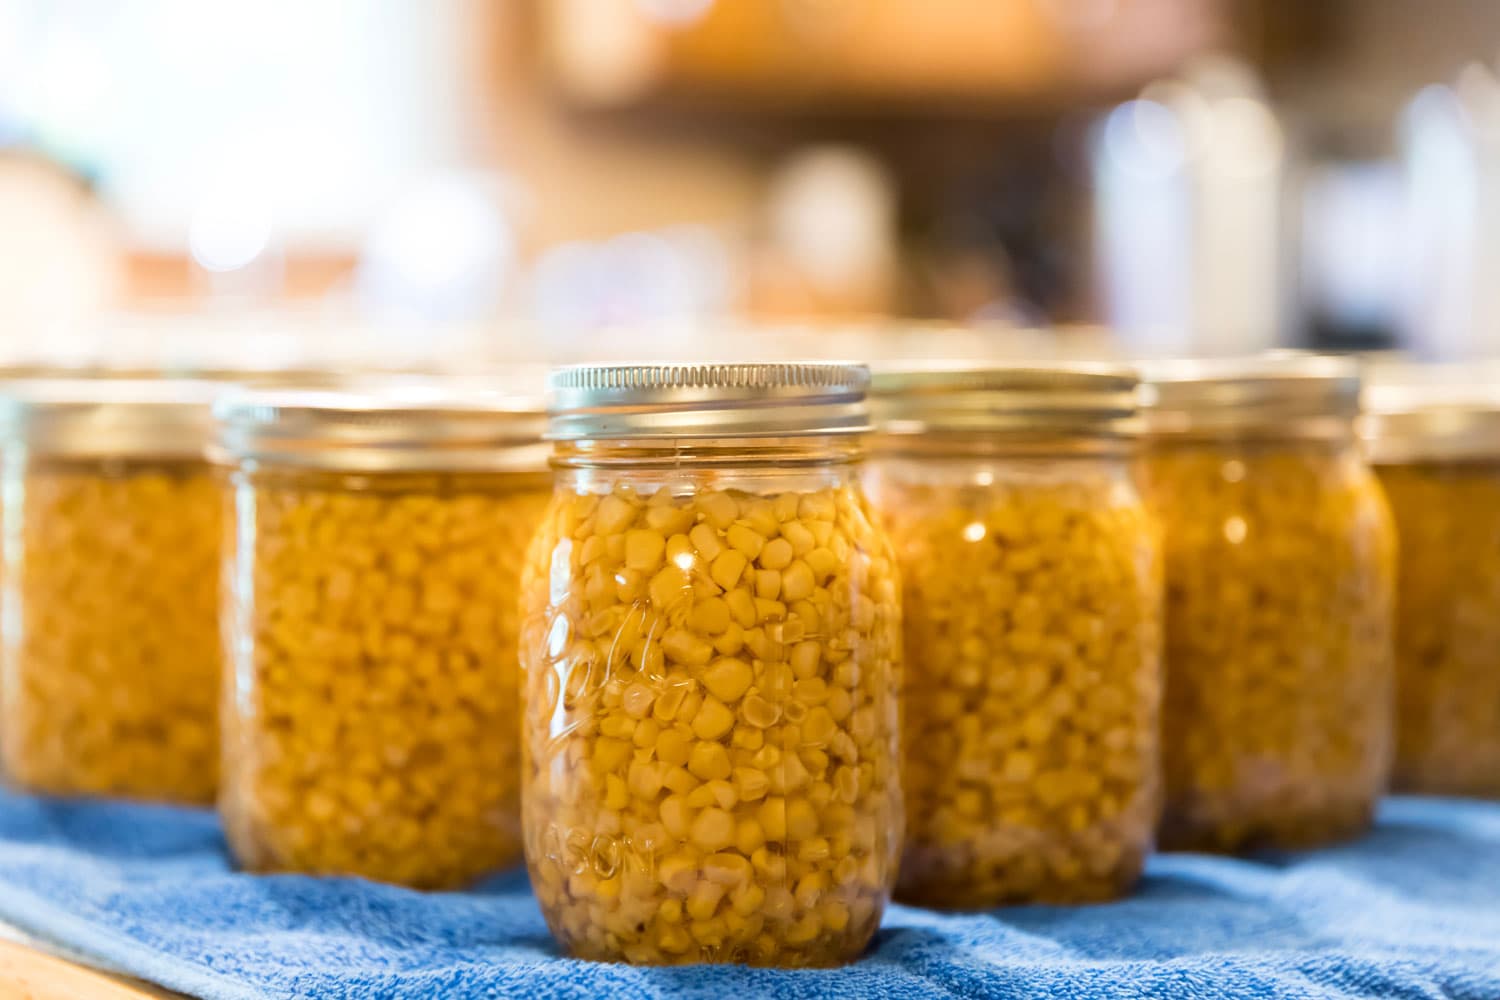 Glass jars of corn fresh out of the pressure canner. They are sitting on a counter on a blue towel.